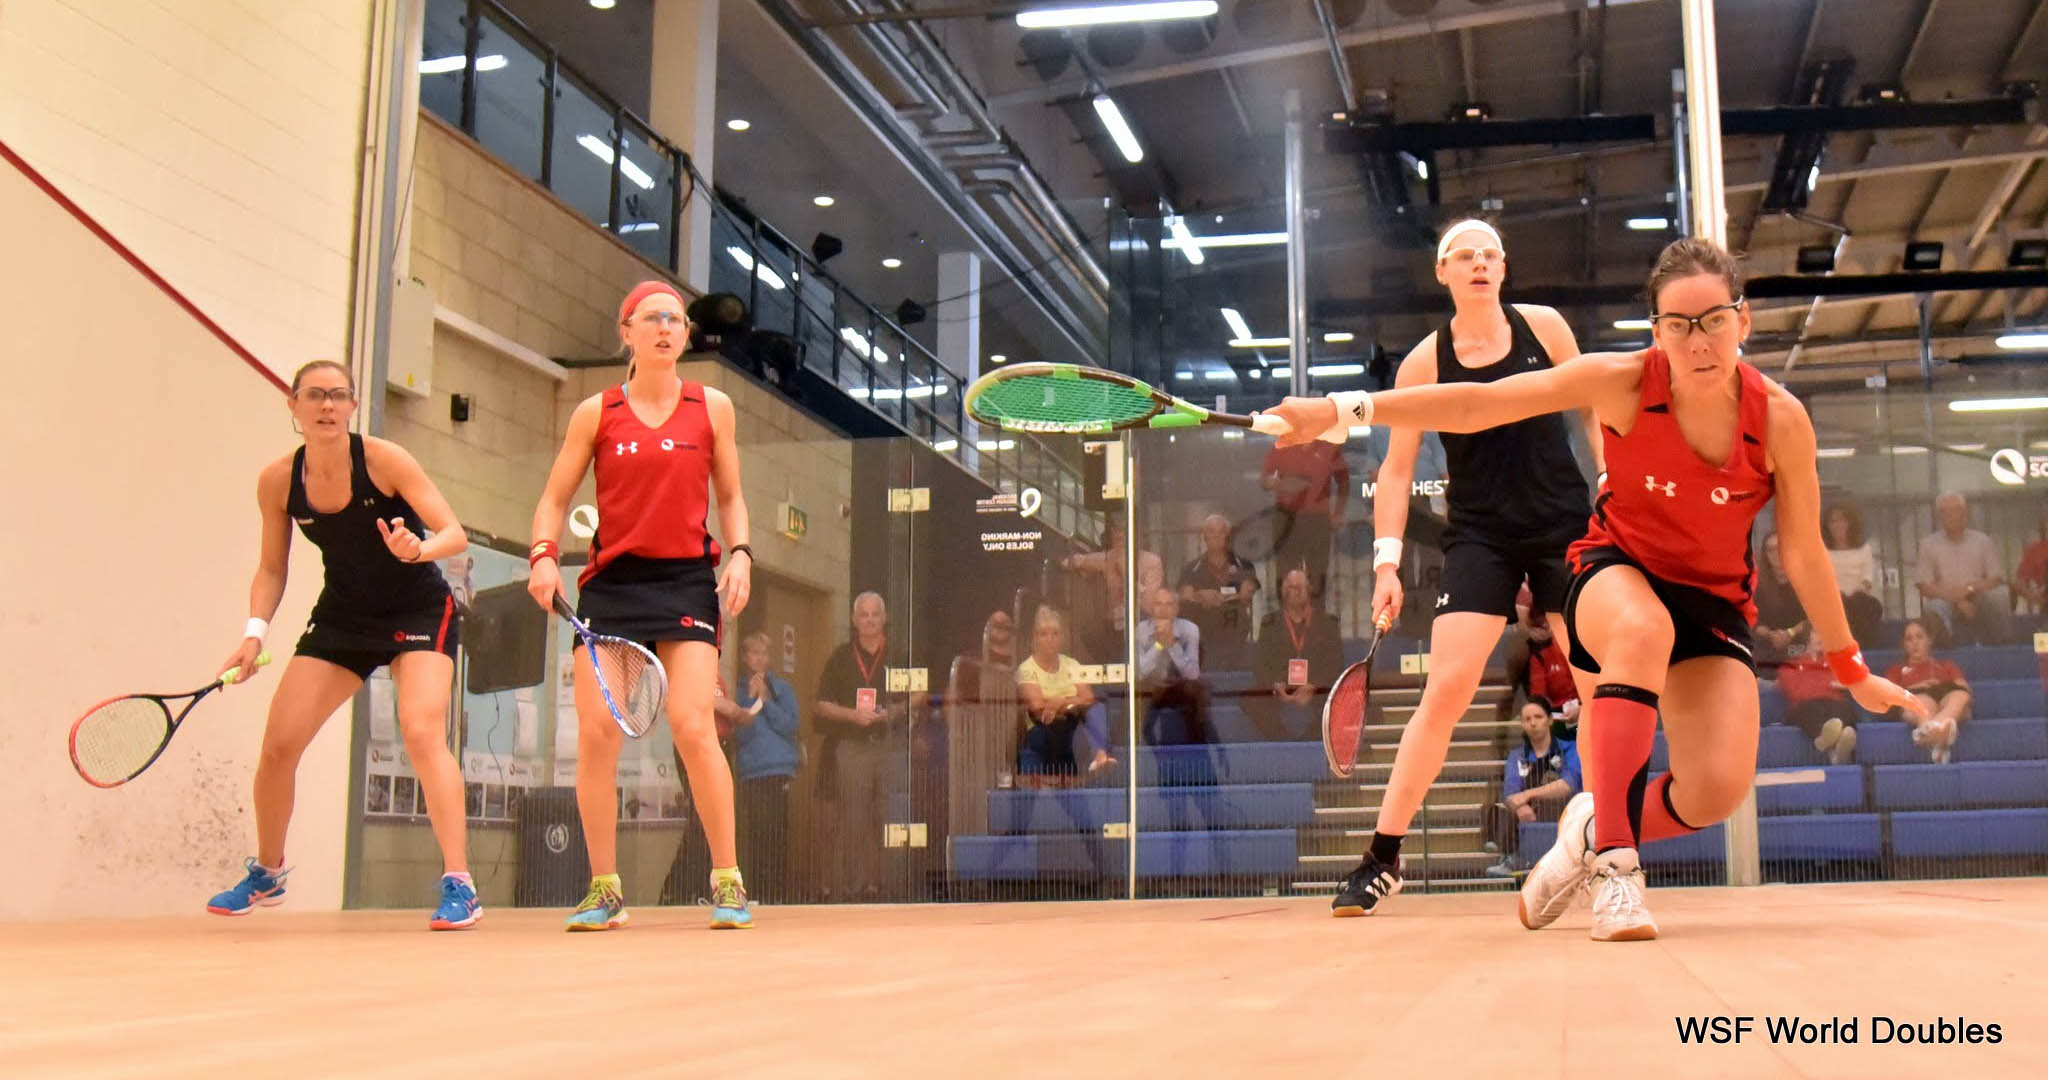 Laura Massaro, Alison Waters, Sarah-Jane Perry and Jenny Duncalf in action on the first day at the WSF World Doubles Squash Championships in Manchester